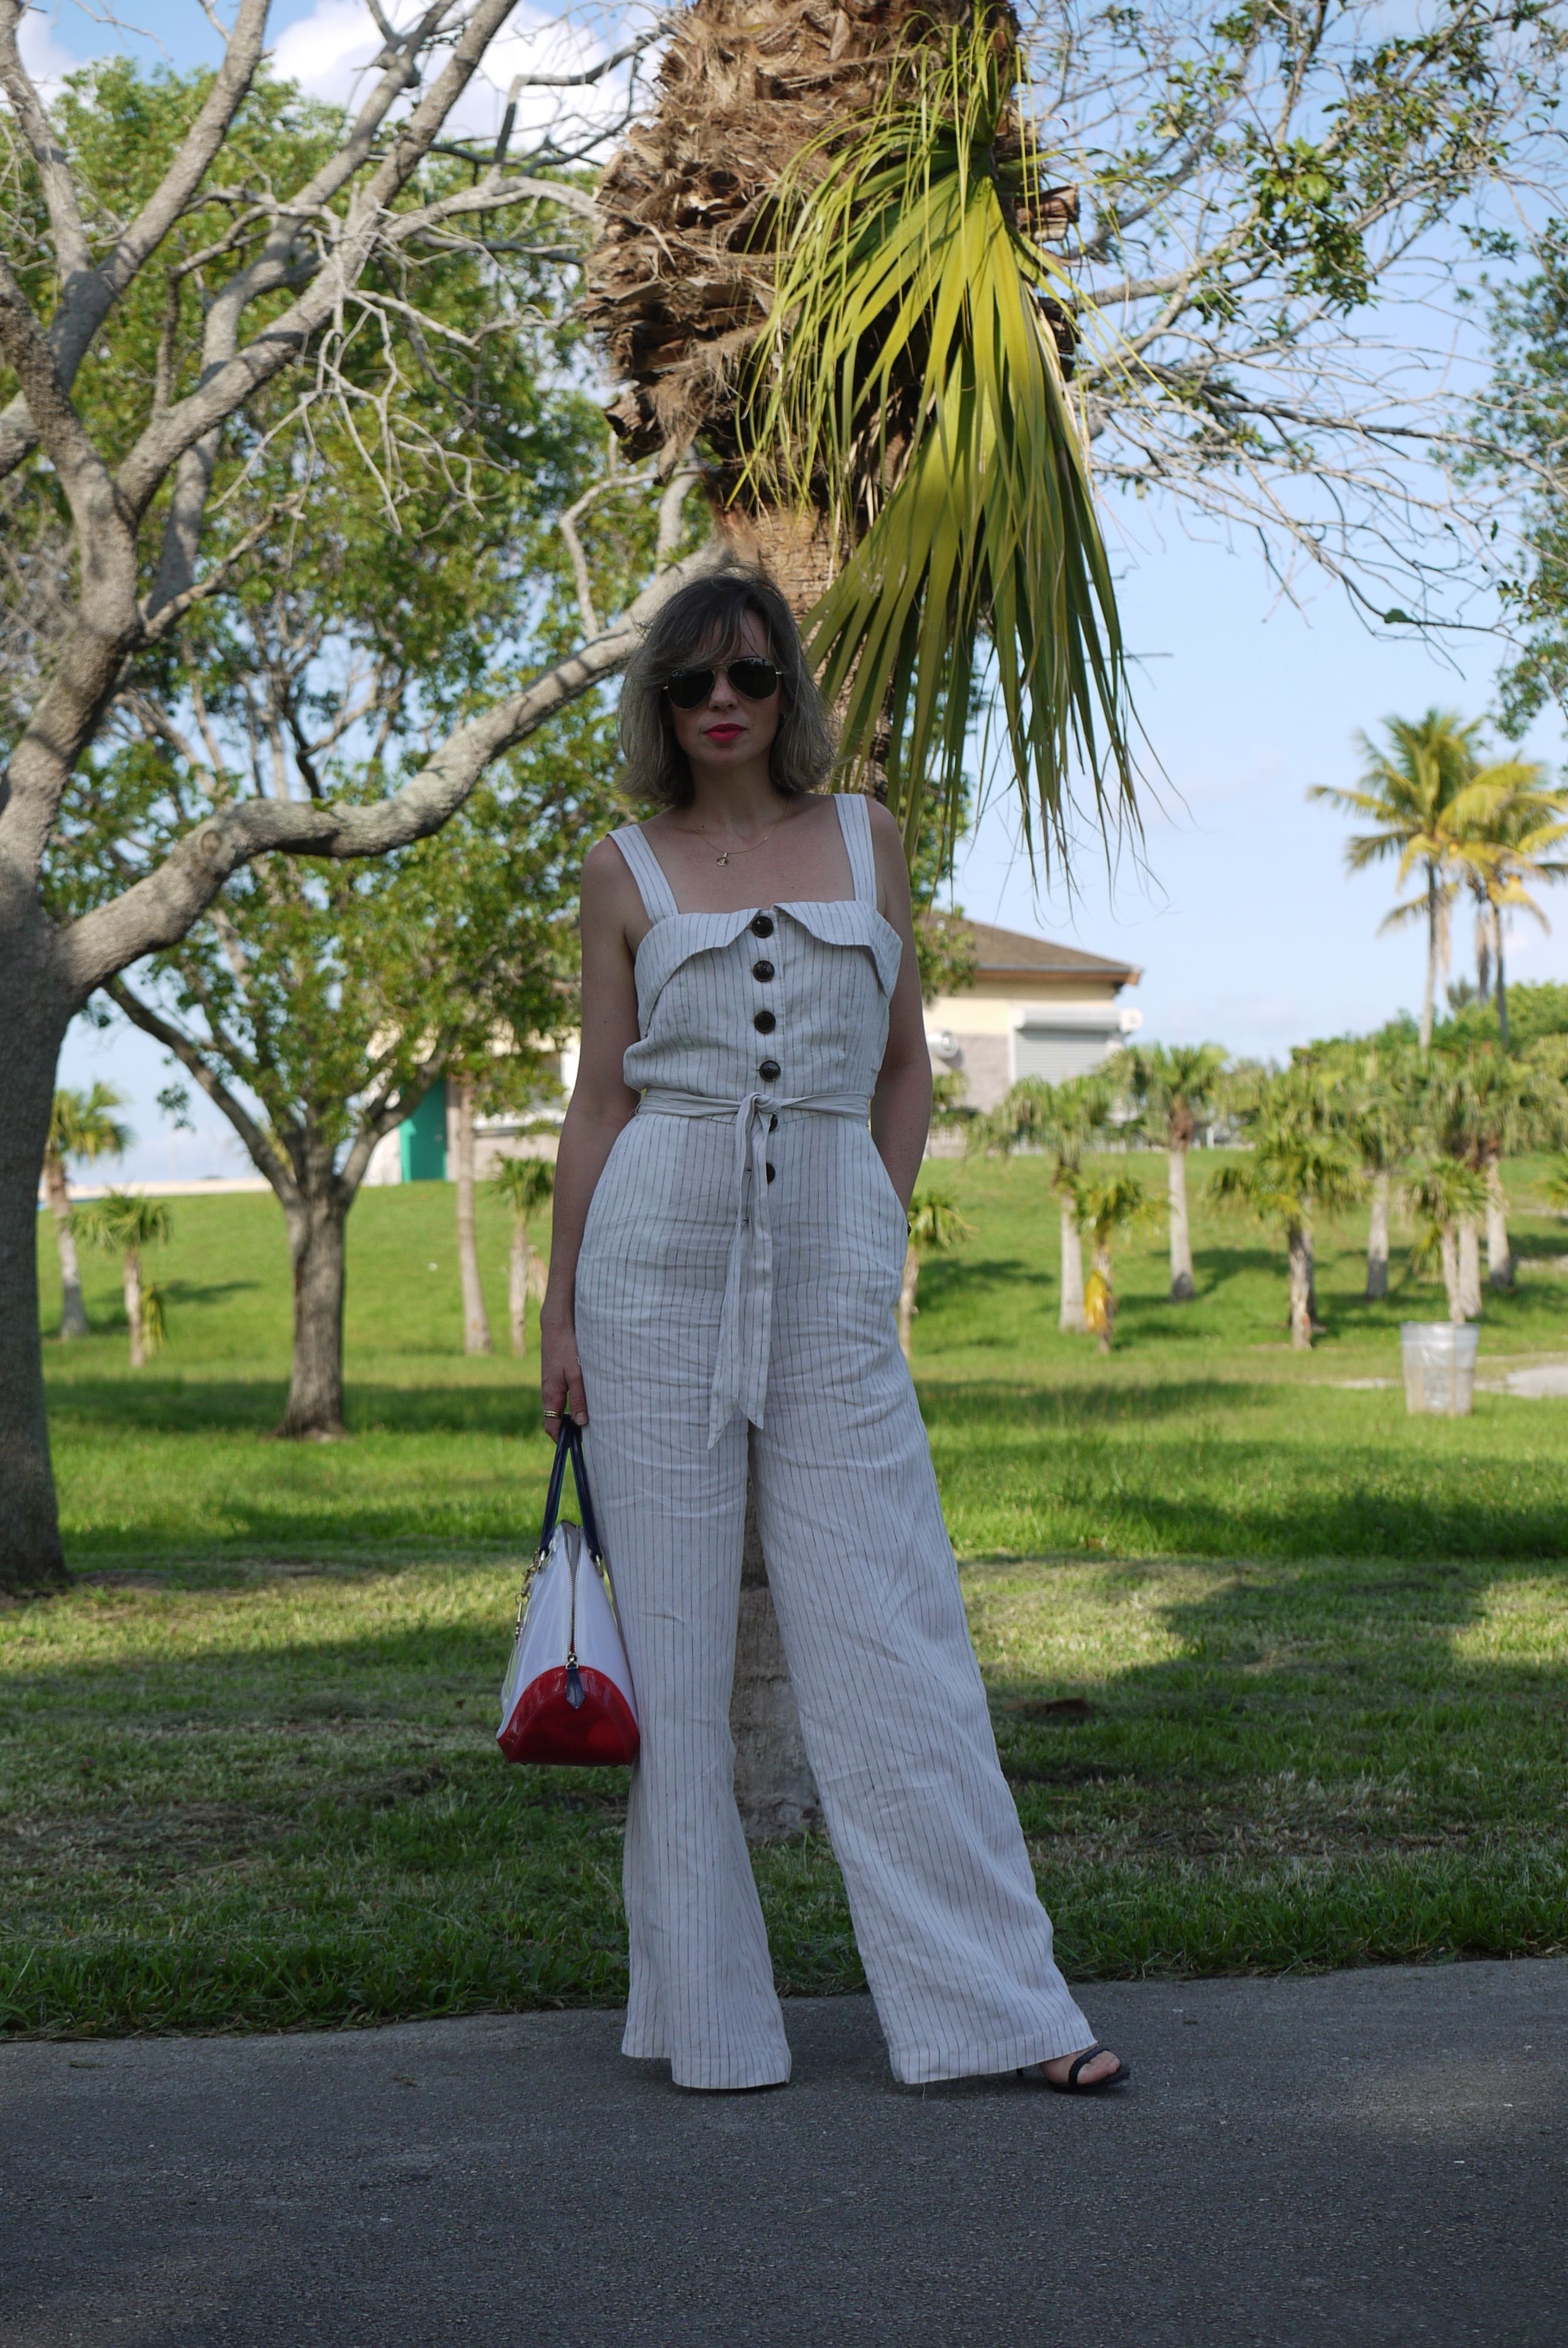 Alba Marina Otero fashion blogger from Mylovelypeople blog shares what kind of accessories wear with a jumpsuit